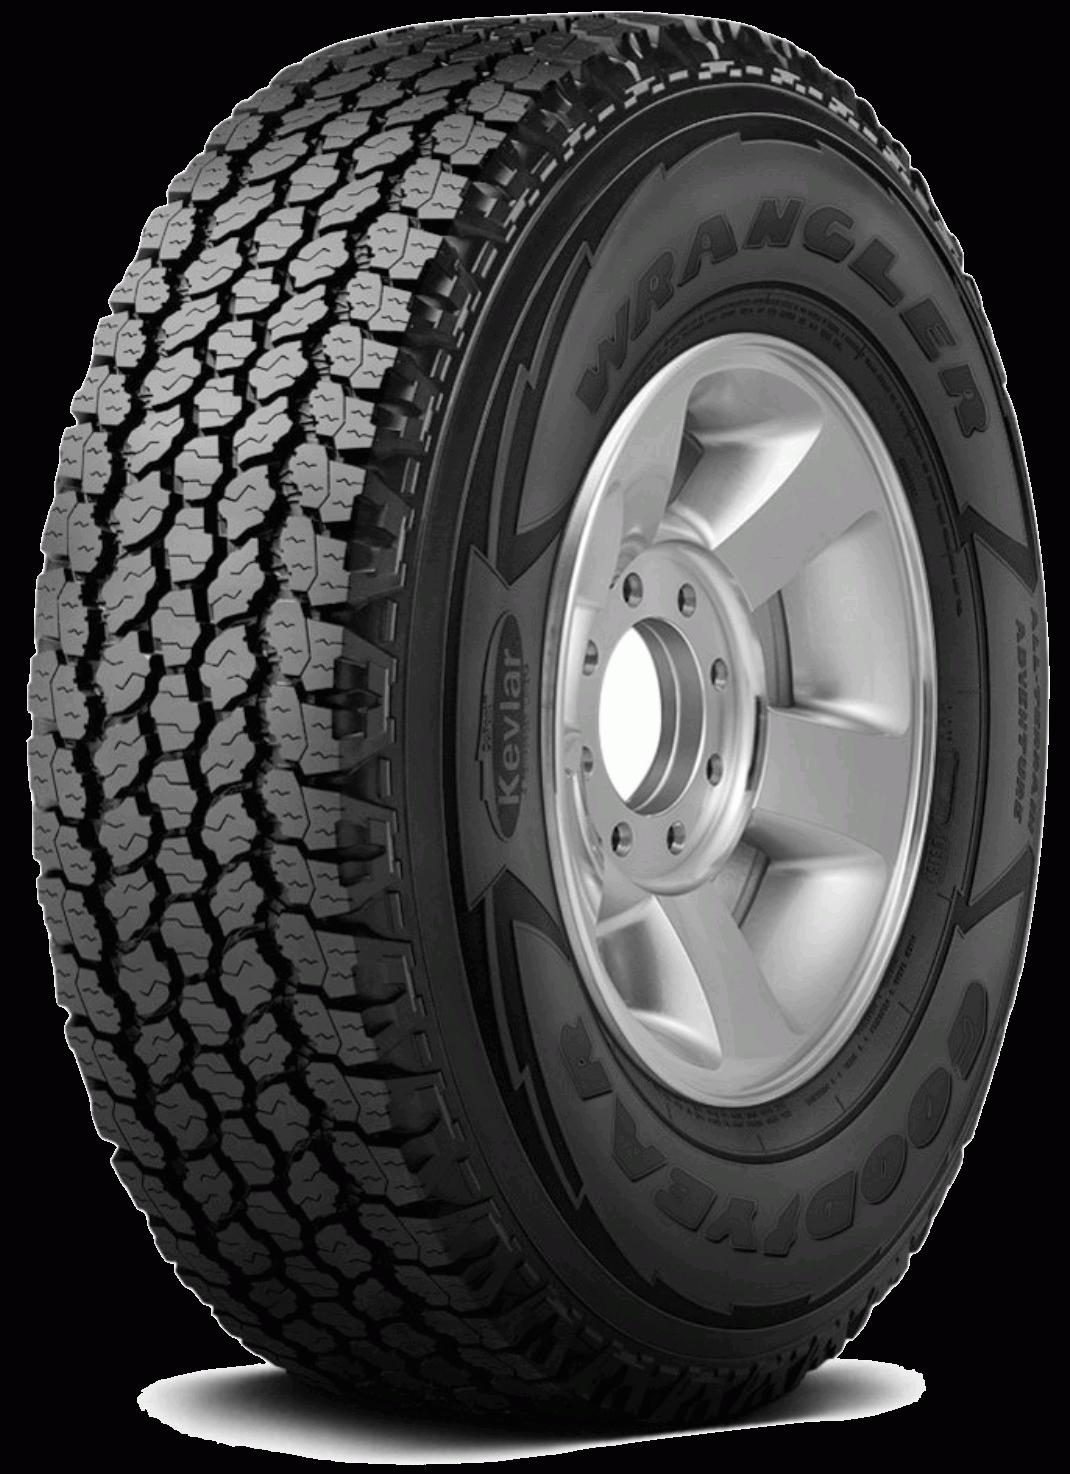 Goodyear Wrangler All Terrain Adventure - Tire Reviews and Tests